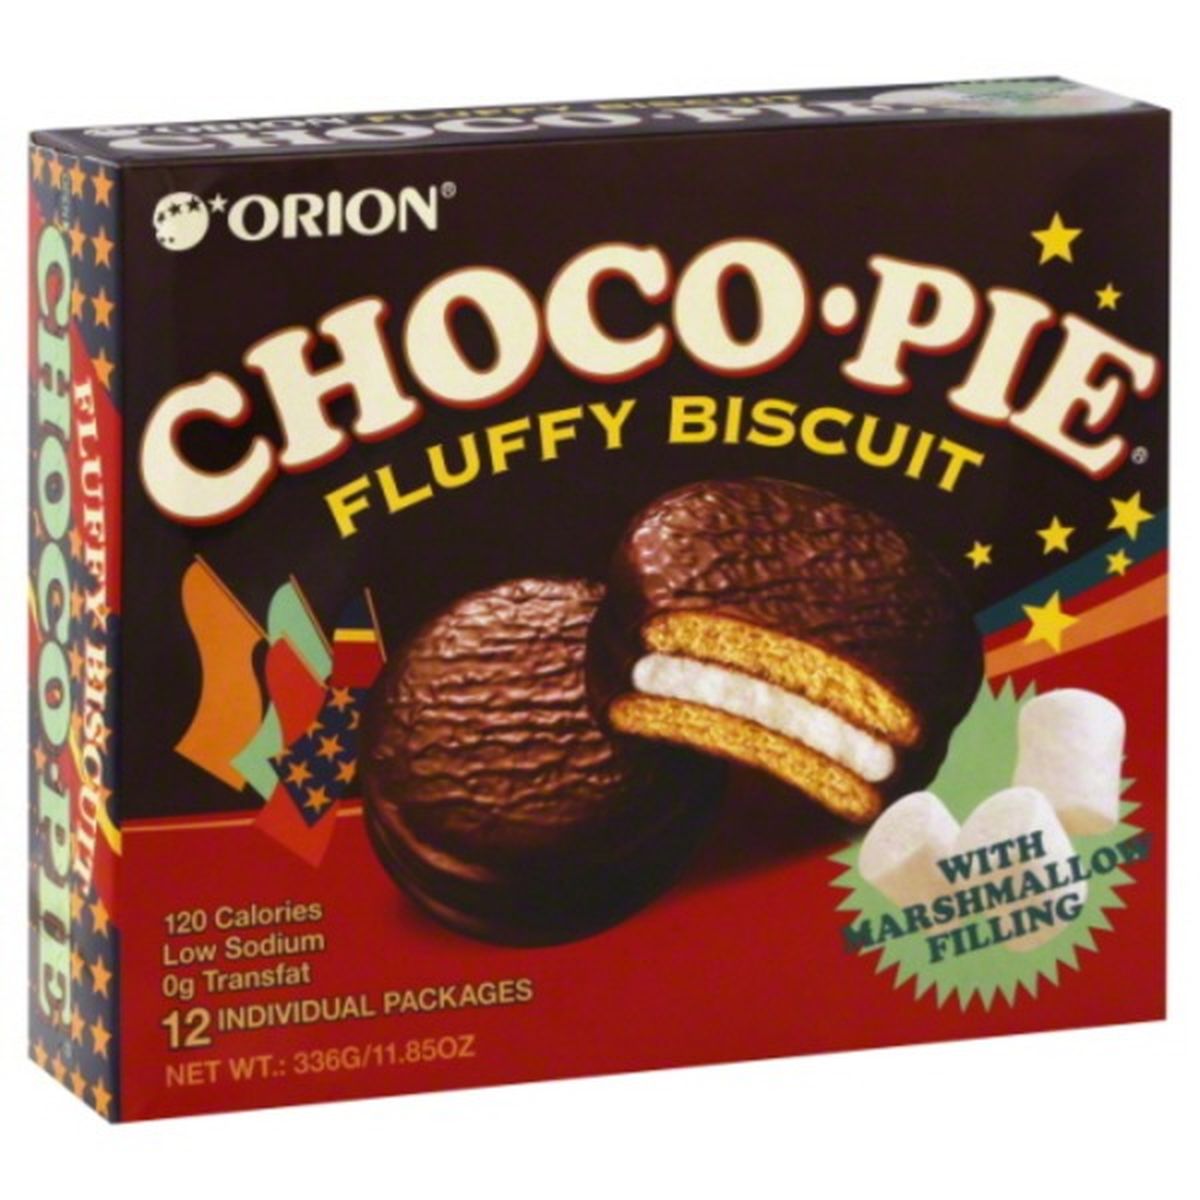 Calories in Orion Choco Pie Biscuit, Fluffy, with Marshmallow Filling